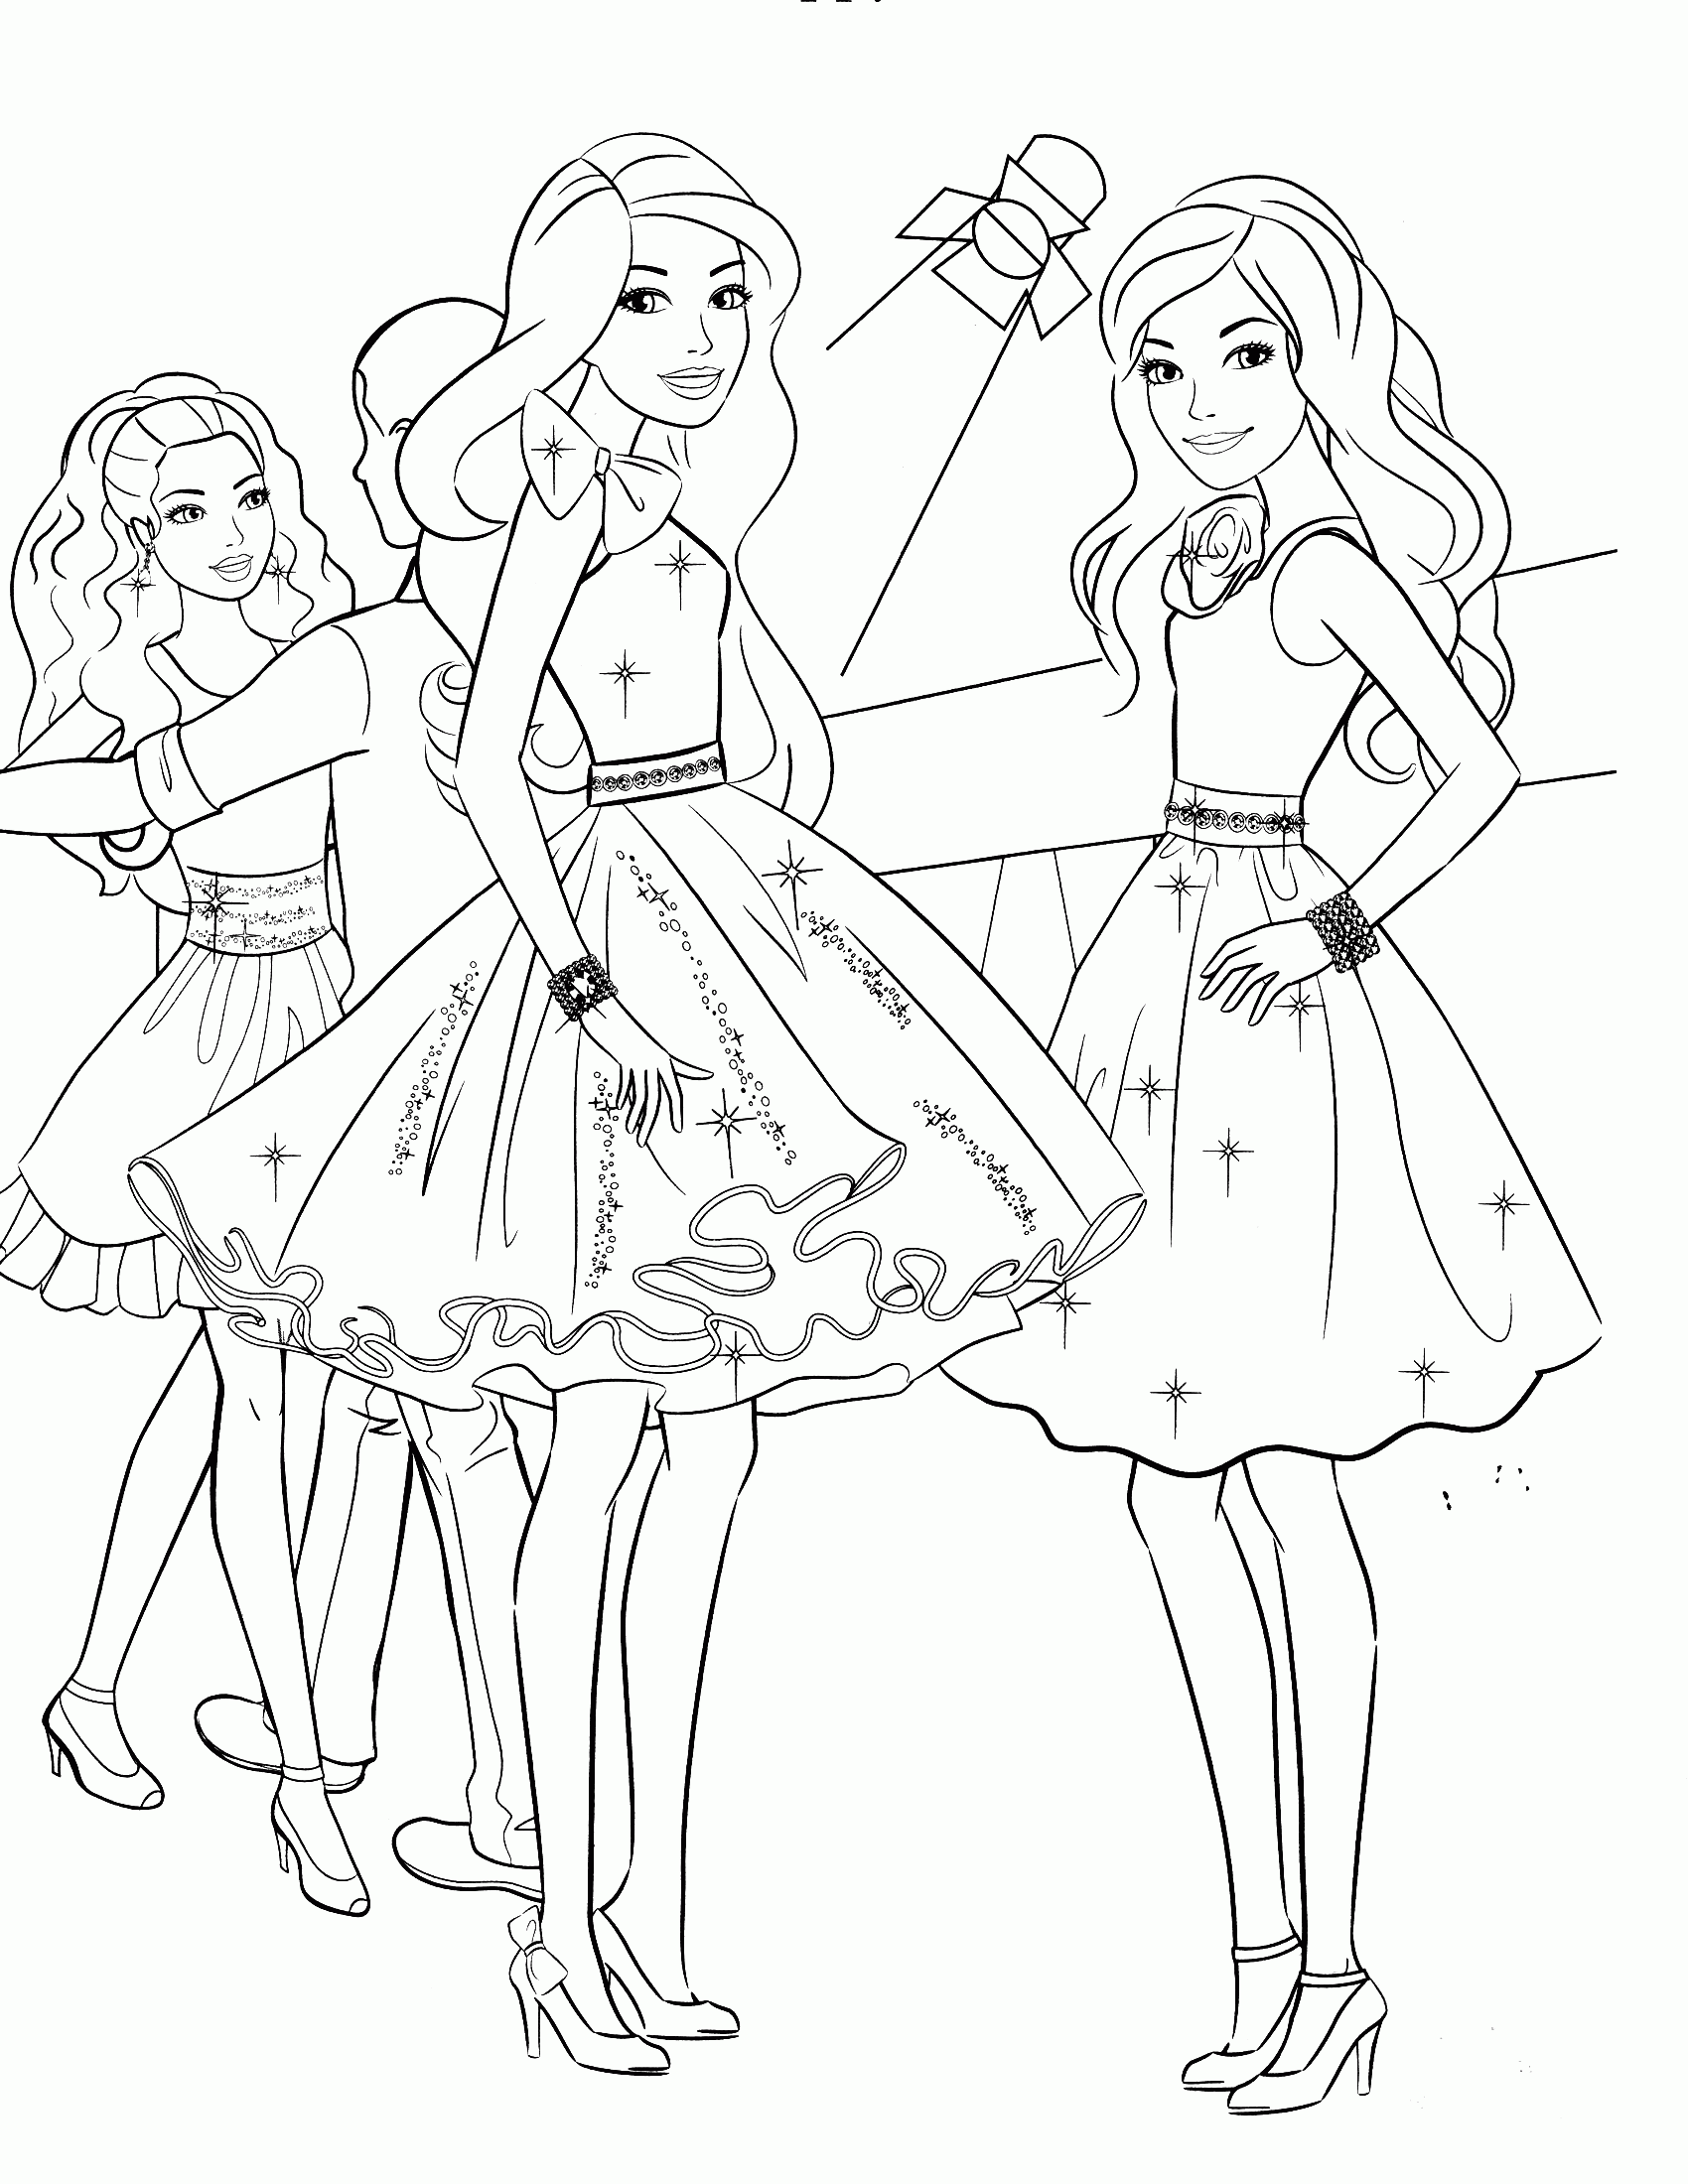 Barbie Ballerina Coloring Pages - Coloring Home